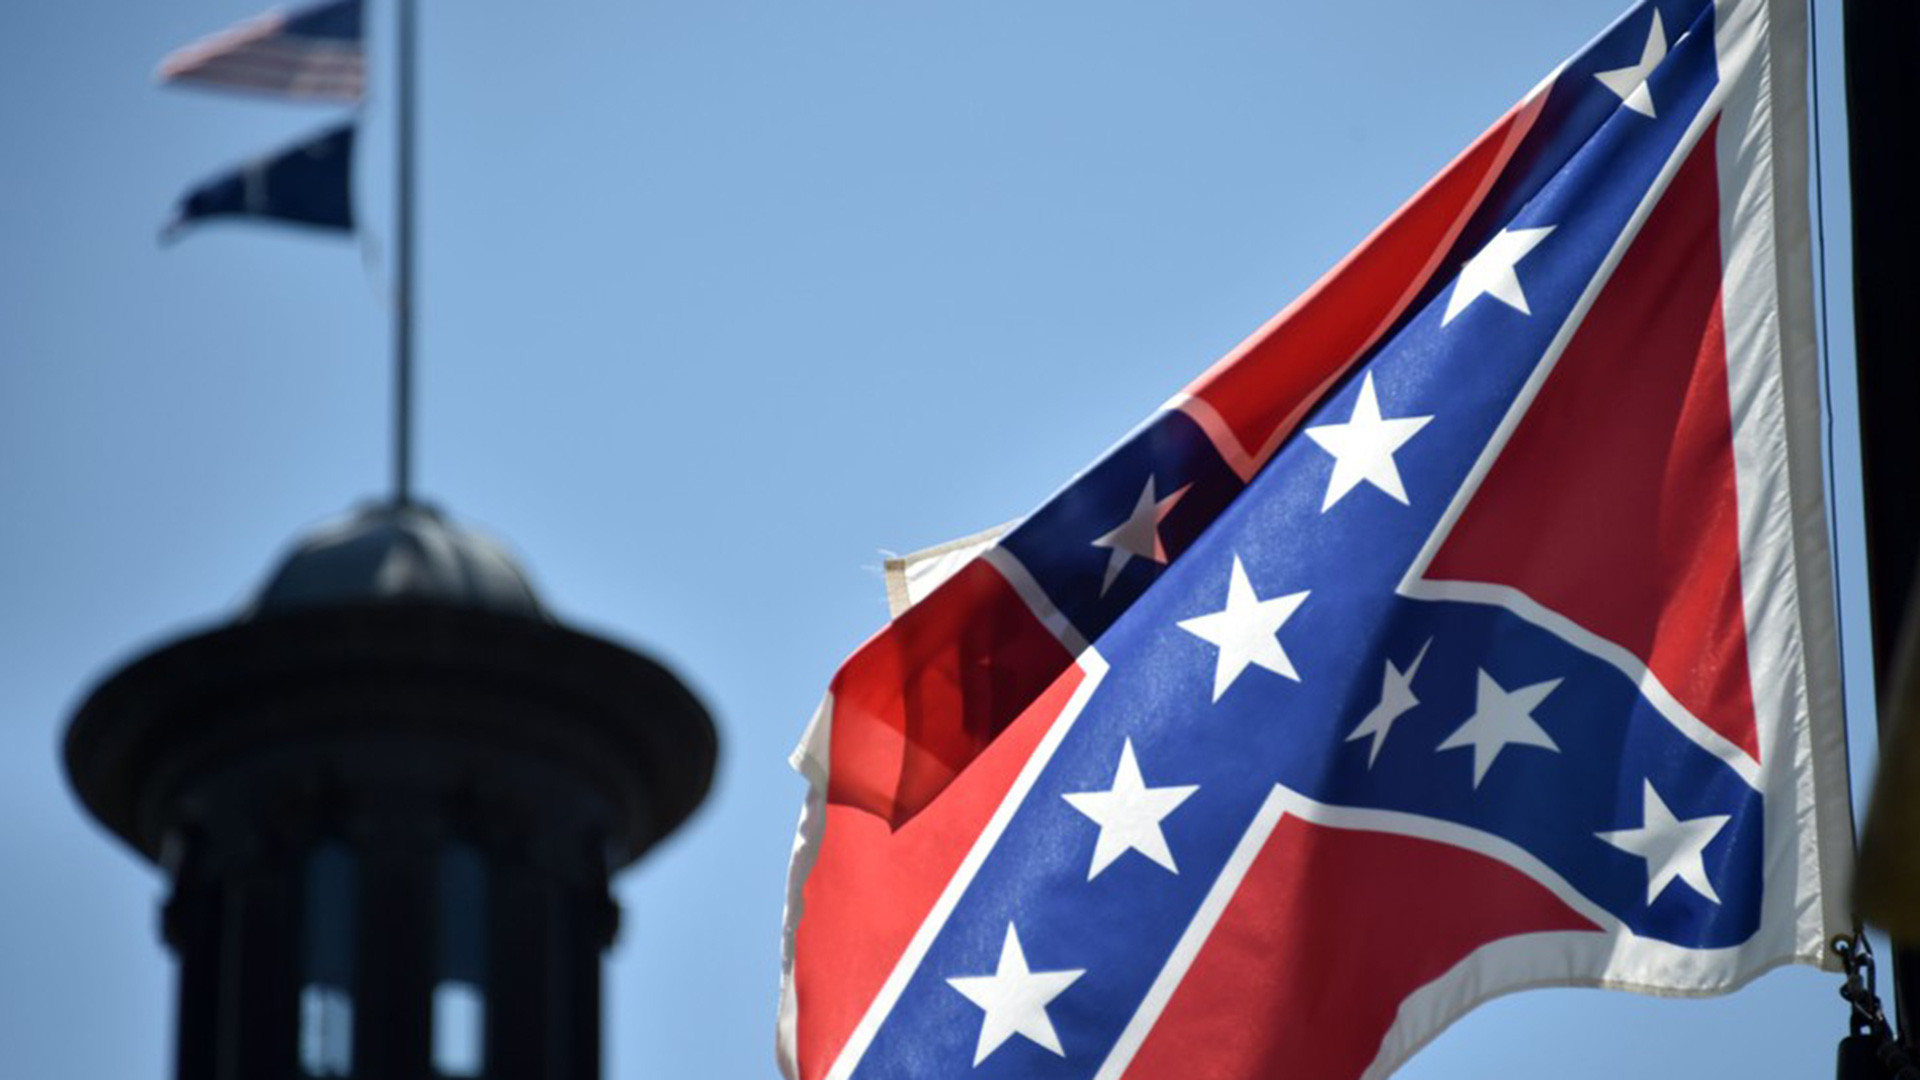 1920x1080 The politics behind the Confederate flag controversy in South Carolina -  The Washington Post